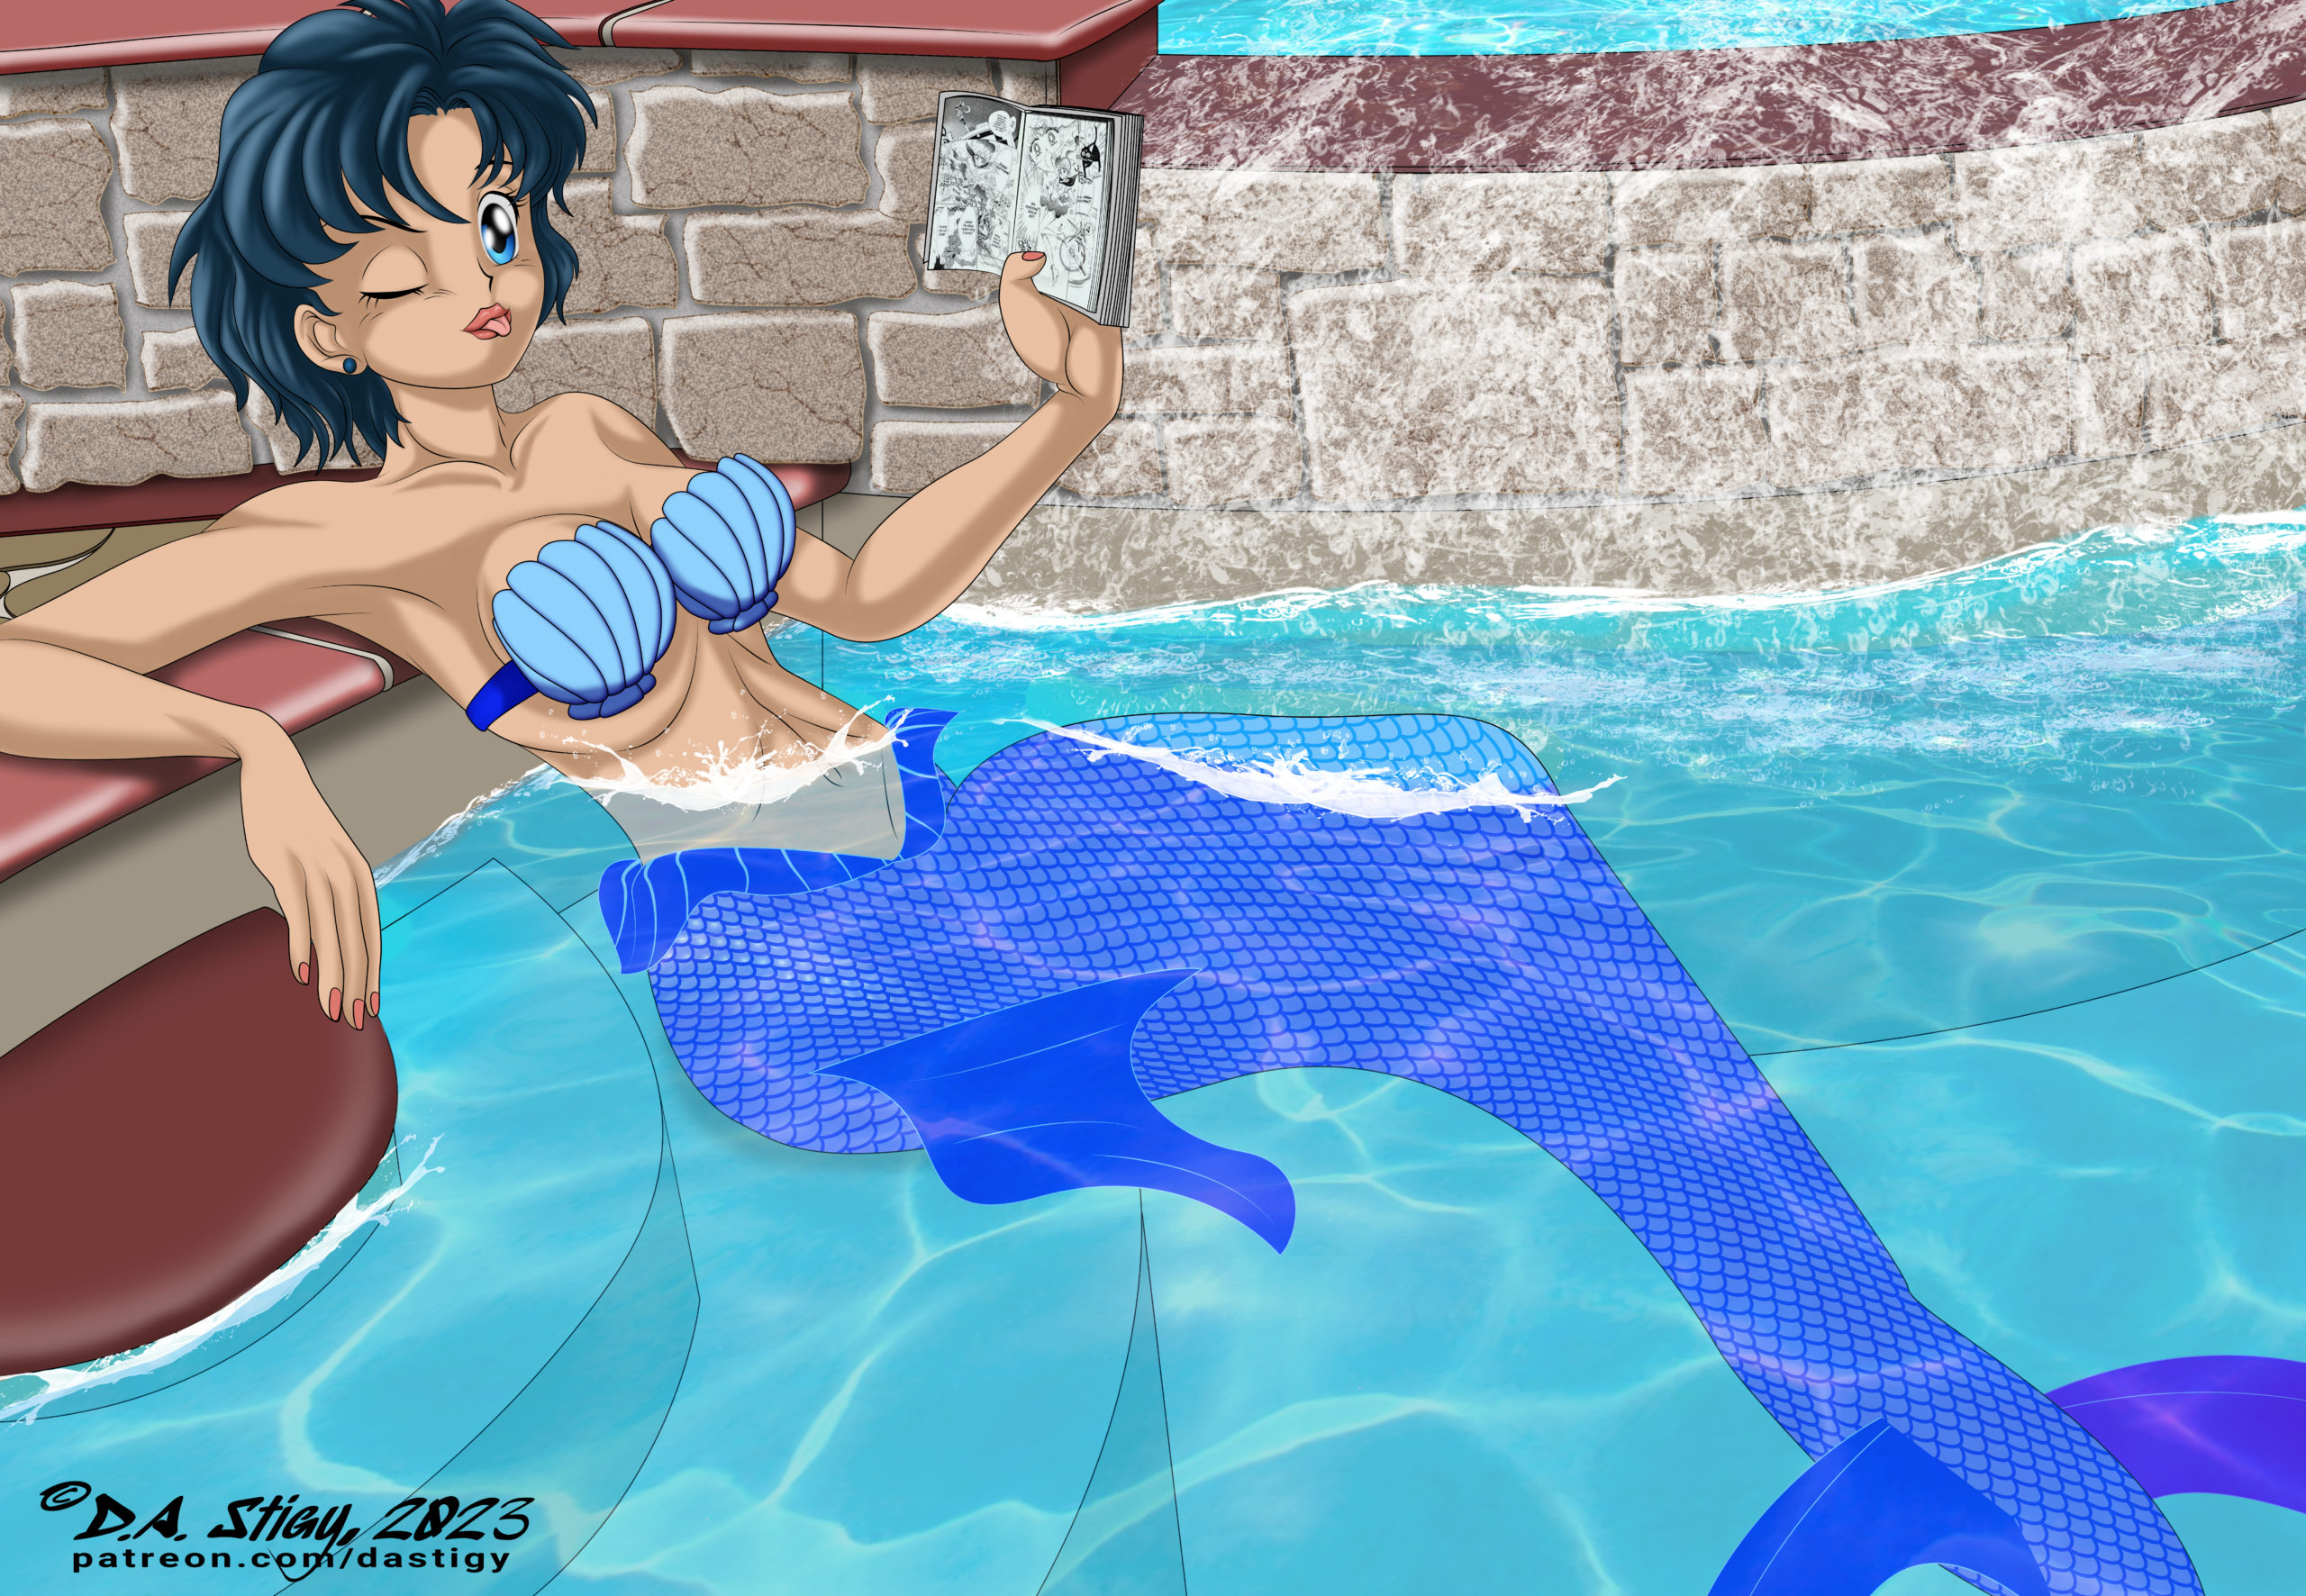 Ami Mizuno as a mermaid, relaxing in a nice pool with a book. Wait, is she secretly reading a Sailor Moon Manga?!